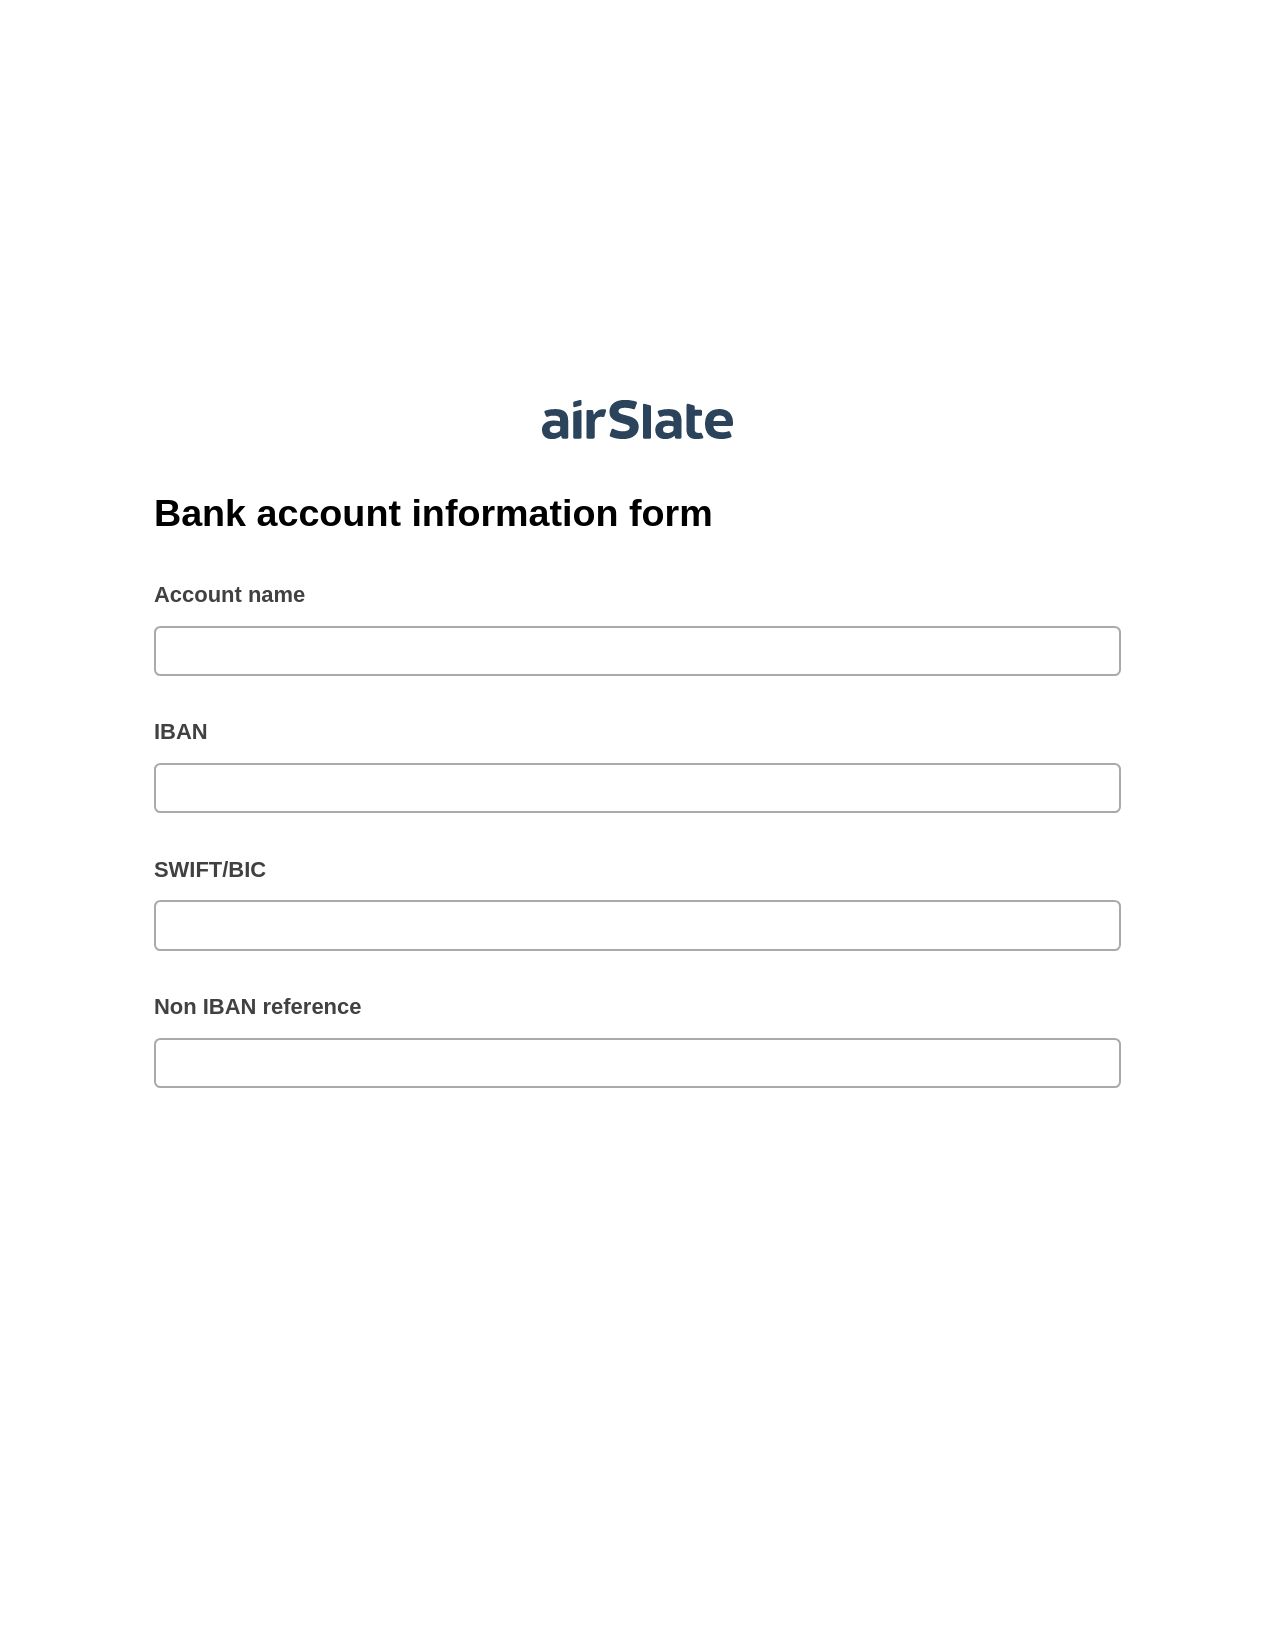 Multirole Bank account information form Pre-fill from Smartsheet Bot, Update MS Dynamics 365 Record Bot, Archive to SharePoint Folder Bot